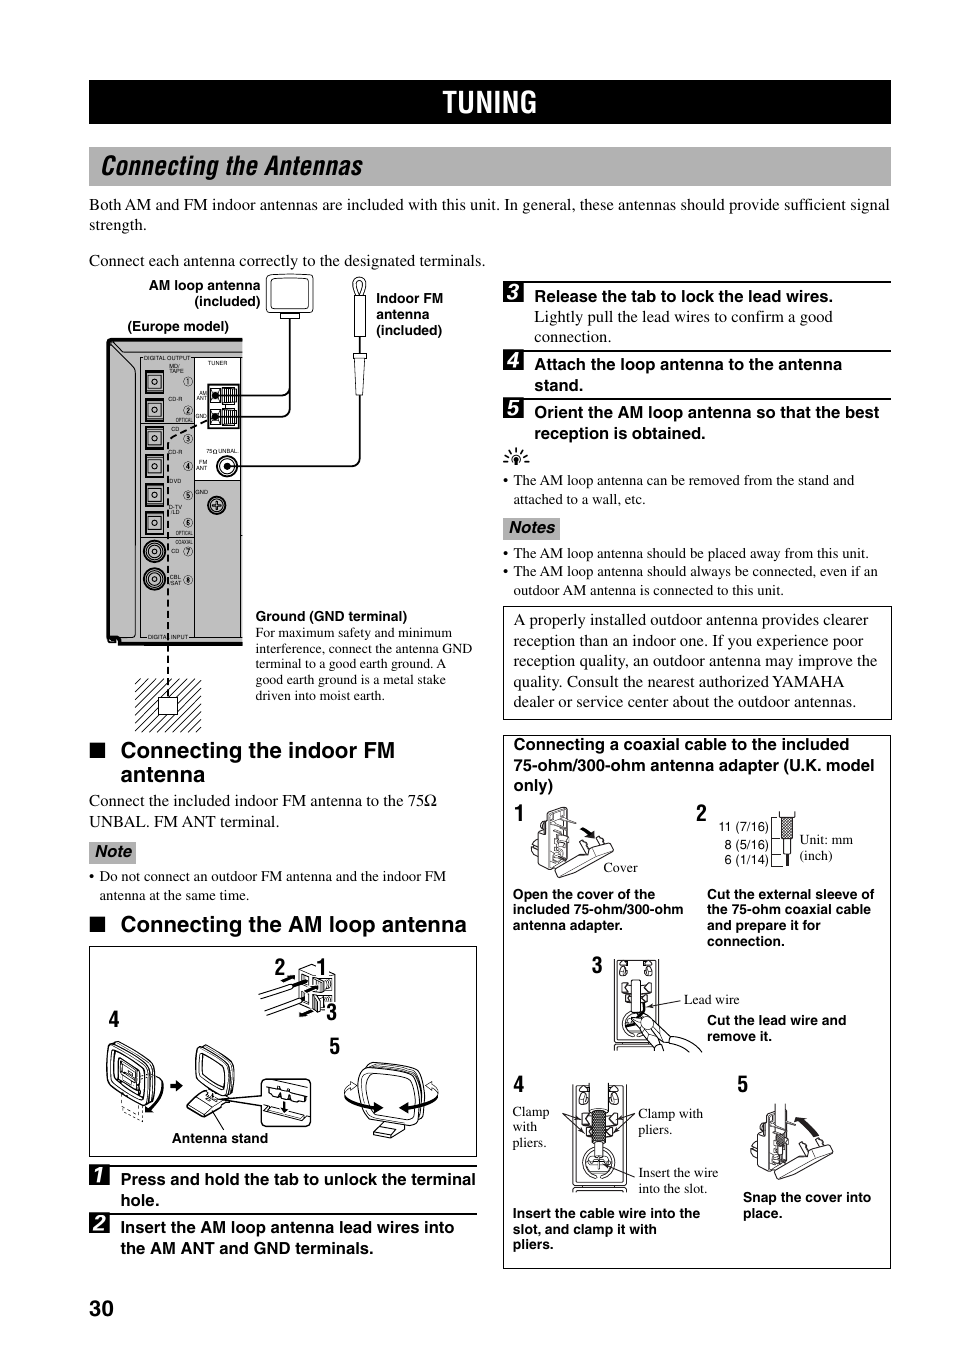 Tuning, Connecting the antennas, Connecting the indoor fm antenna | Connecting the am loop antenna | Yamaha RX-V800RDS User Manual | Page 32 / 83